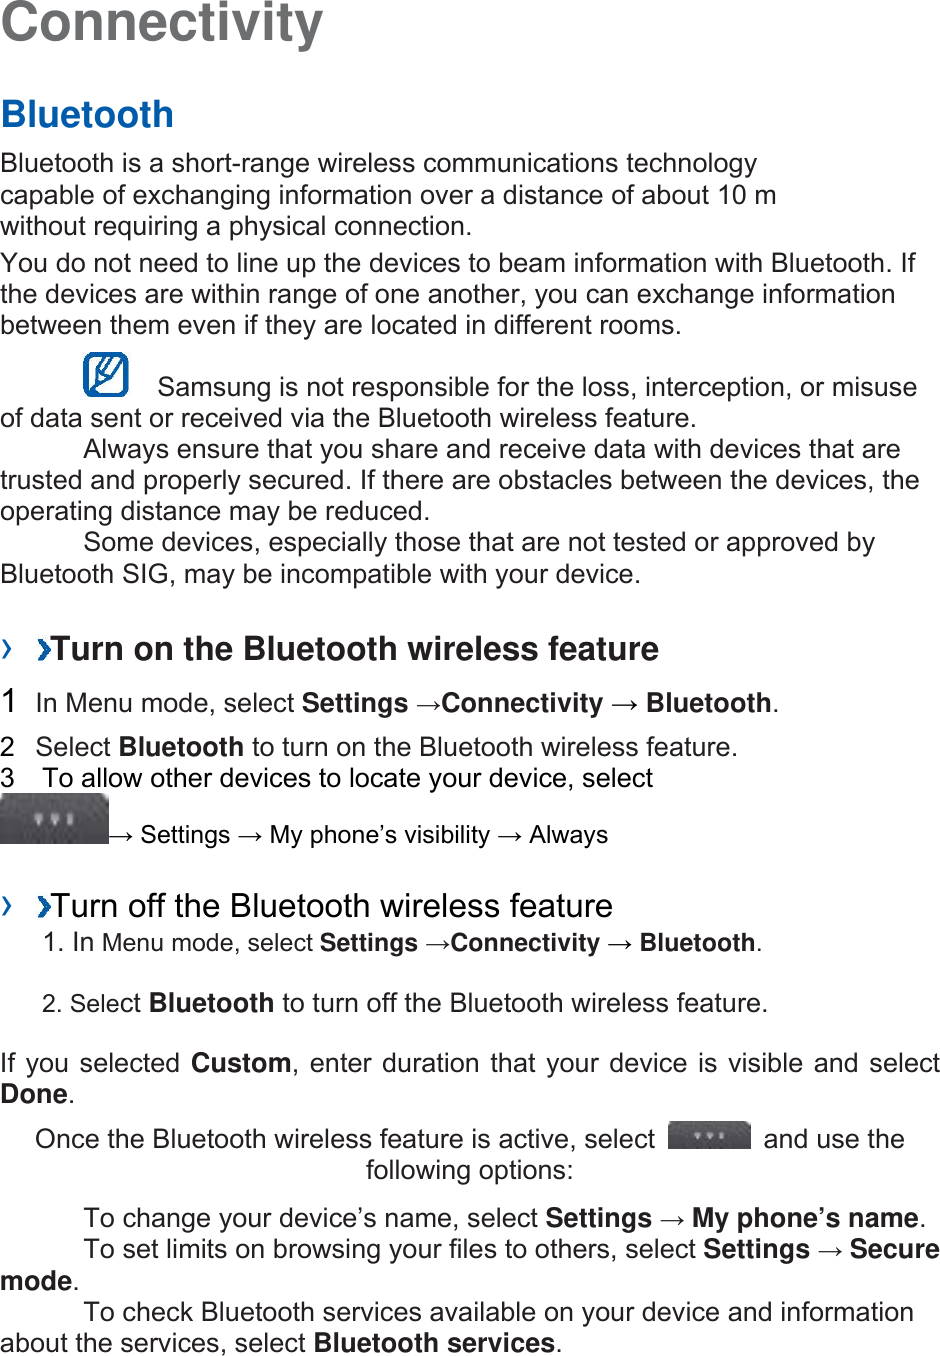 Connectivity   Bluetooth   Bluetooth is a short-range wireless communications technology capable of exchanging information over a distance of about 10 m without requiring a physical connection.   You do not need to line up the devices to beam information with Bluetooth. If the devices are within range of one another, you can exchange information between them even if they are located in different rooms.      Samsung is not responsible for the loss, interception, or misuse of data sent or received via the Bluetooth wireless feature.     Always ensure that you share and receive data with devices that are trusted and properly secured. If there are obstacles between the devices, the operating distance may be reduced.     Some devices, especially those that are not tested or approved by Bluetooth SIG, may be incompatible with your device.    ›  Turn on the Bluetooth wireless feature   1  In Menu mode, select Settings →Connectivity → Bluetooth.  2  Select Bluetooth to turn on the Bluetooth wireless feature.   3    To allow other devices to locate your device, select   → Settings → My phone’s visibility → Always    ›  Turn off the Bluetooth wireless feature   1. In Menu mode, select Settings →Connectivity → Bluetooth. 2. Select Bluetooth to turn off the Bluetooth wireless feature. If you selected Custom, enter duration that your device is visible and select Done.  Once the Bluetooth wireless feature is active, select    and use the following options:     To change your device’s name, select Settings → My phone’s name.    To set limits on browsing your files to others, select Settings → Secure mode.    To check Bluetooth services available on your device and information about the services, select Bluetooth services.   